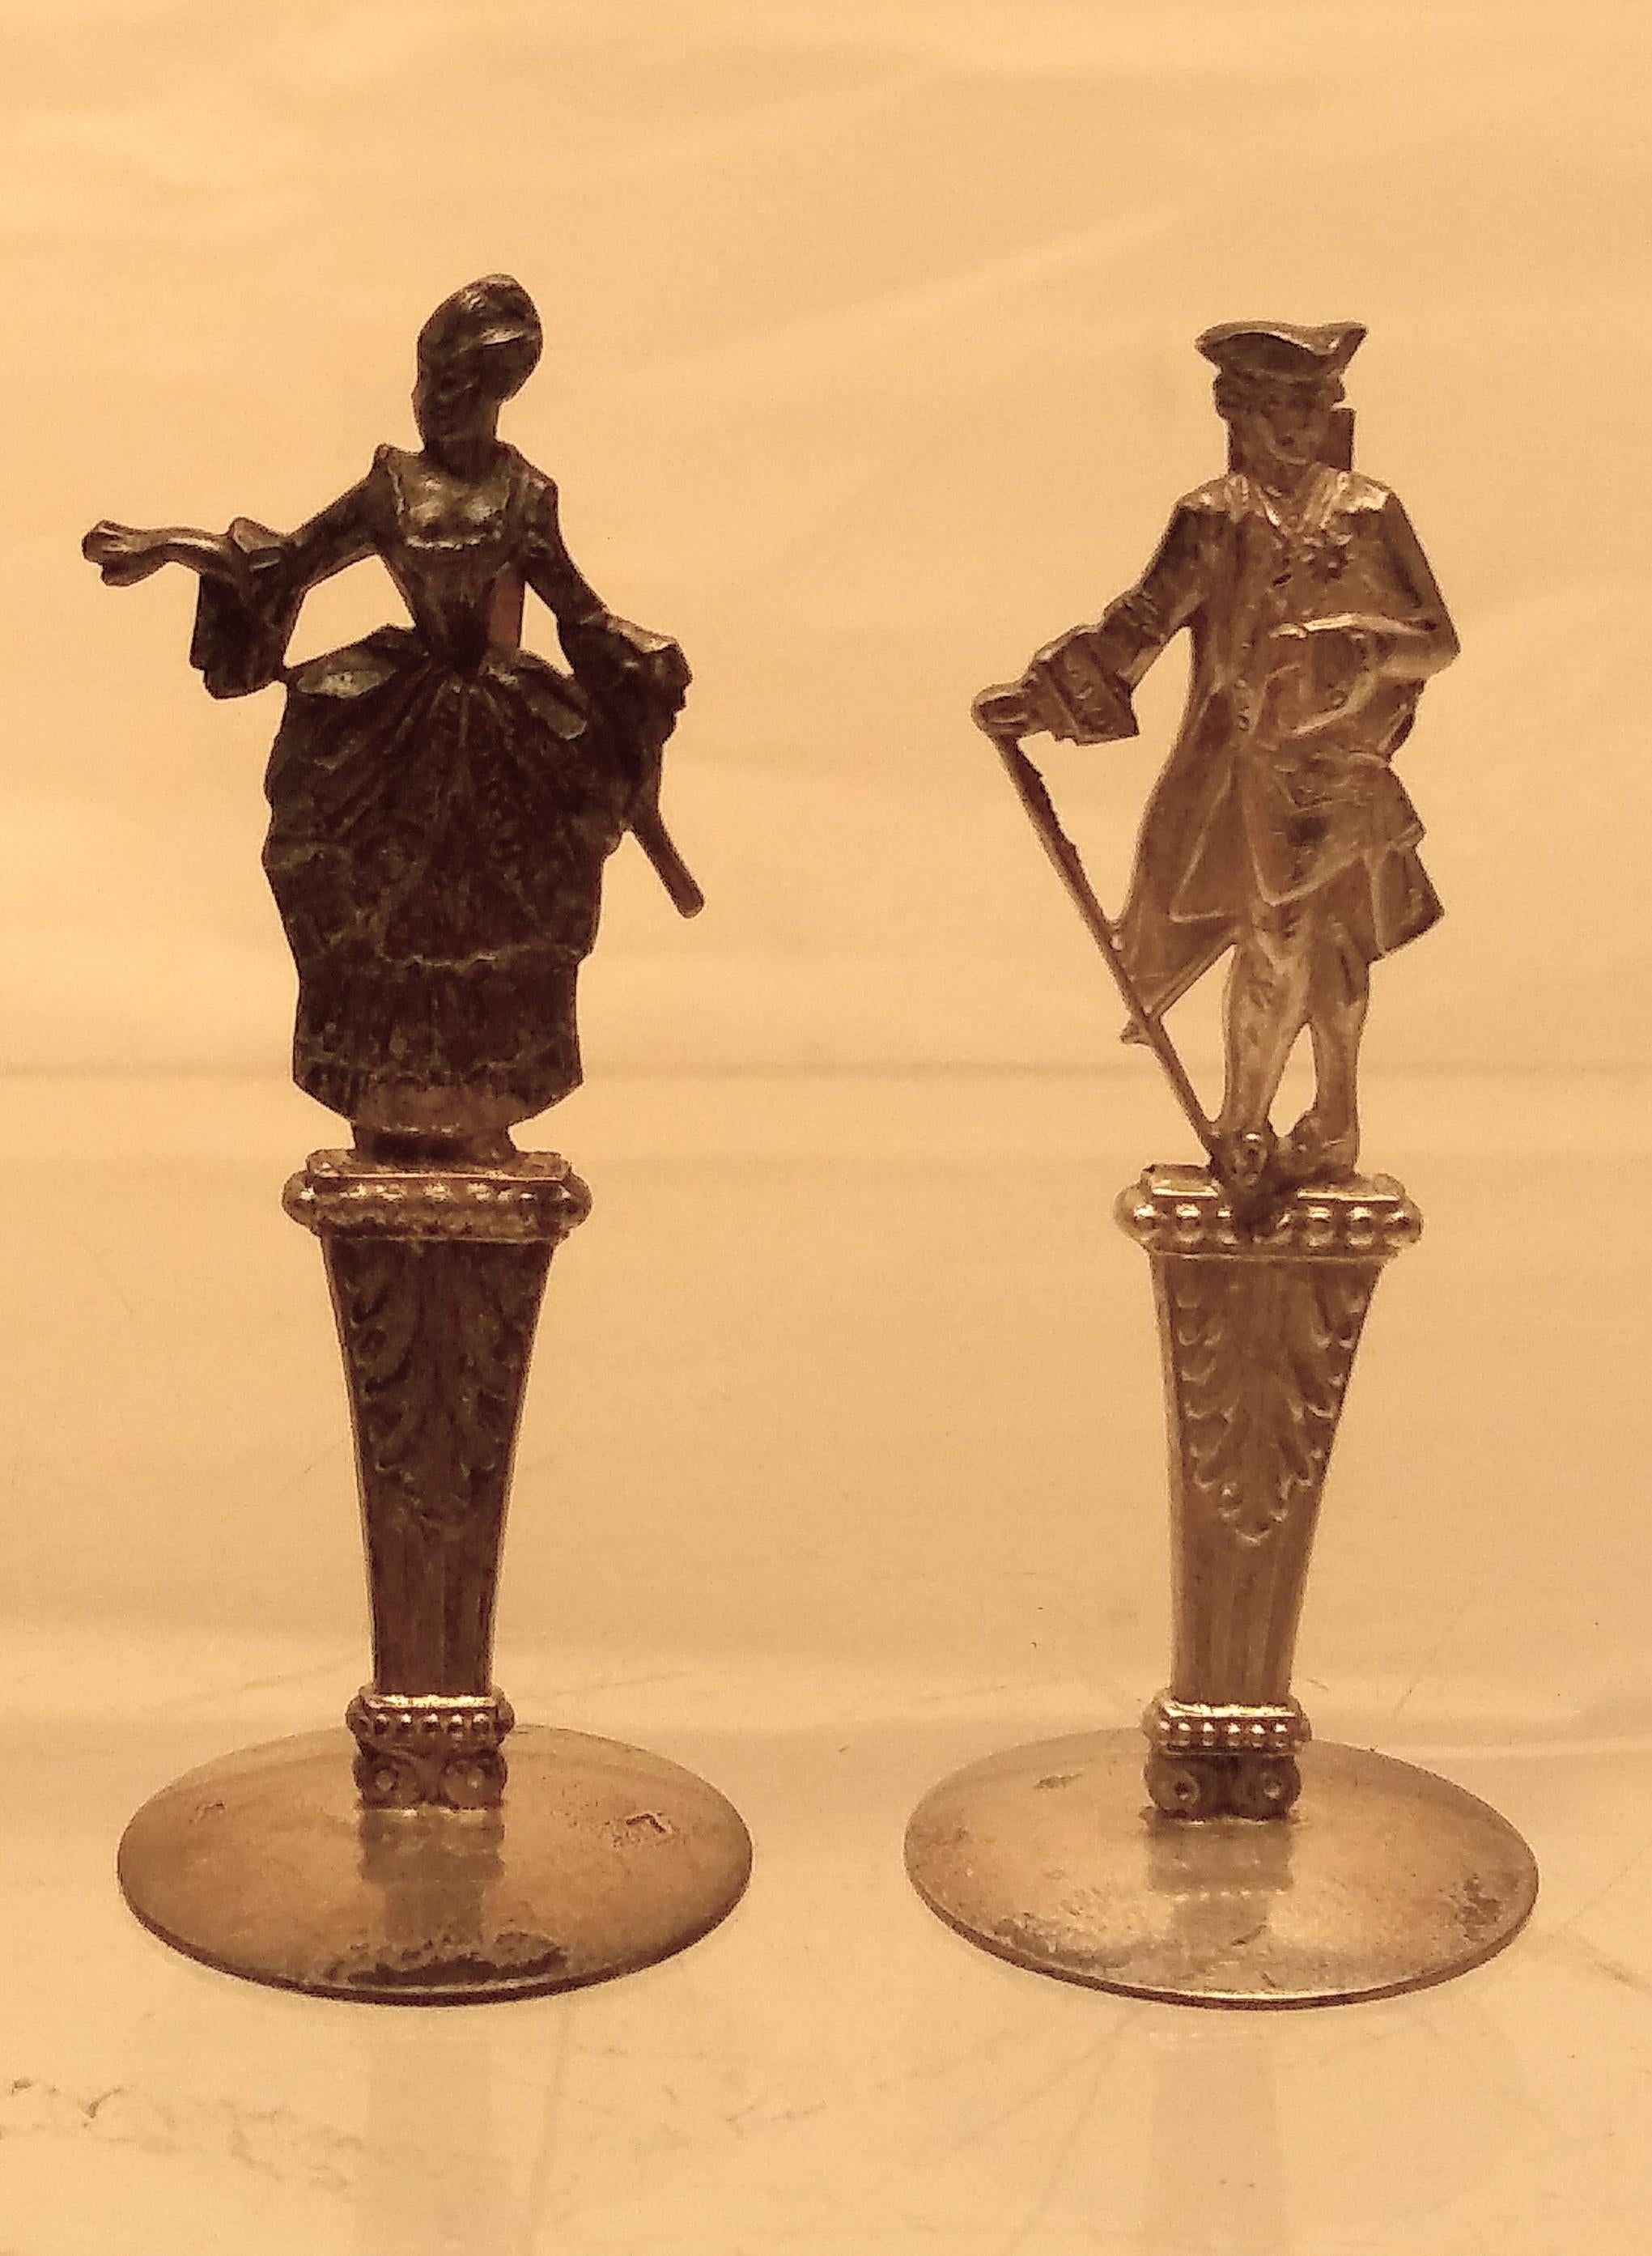 Rare set of six French silver place cards in figural forms. Two in center of image measuring 2.4 inches tall and other four measuring 2.6 inches tall. Bearing hallmarks as shown in images.

 